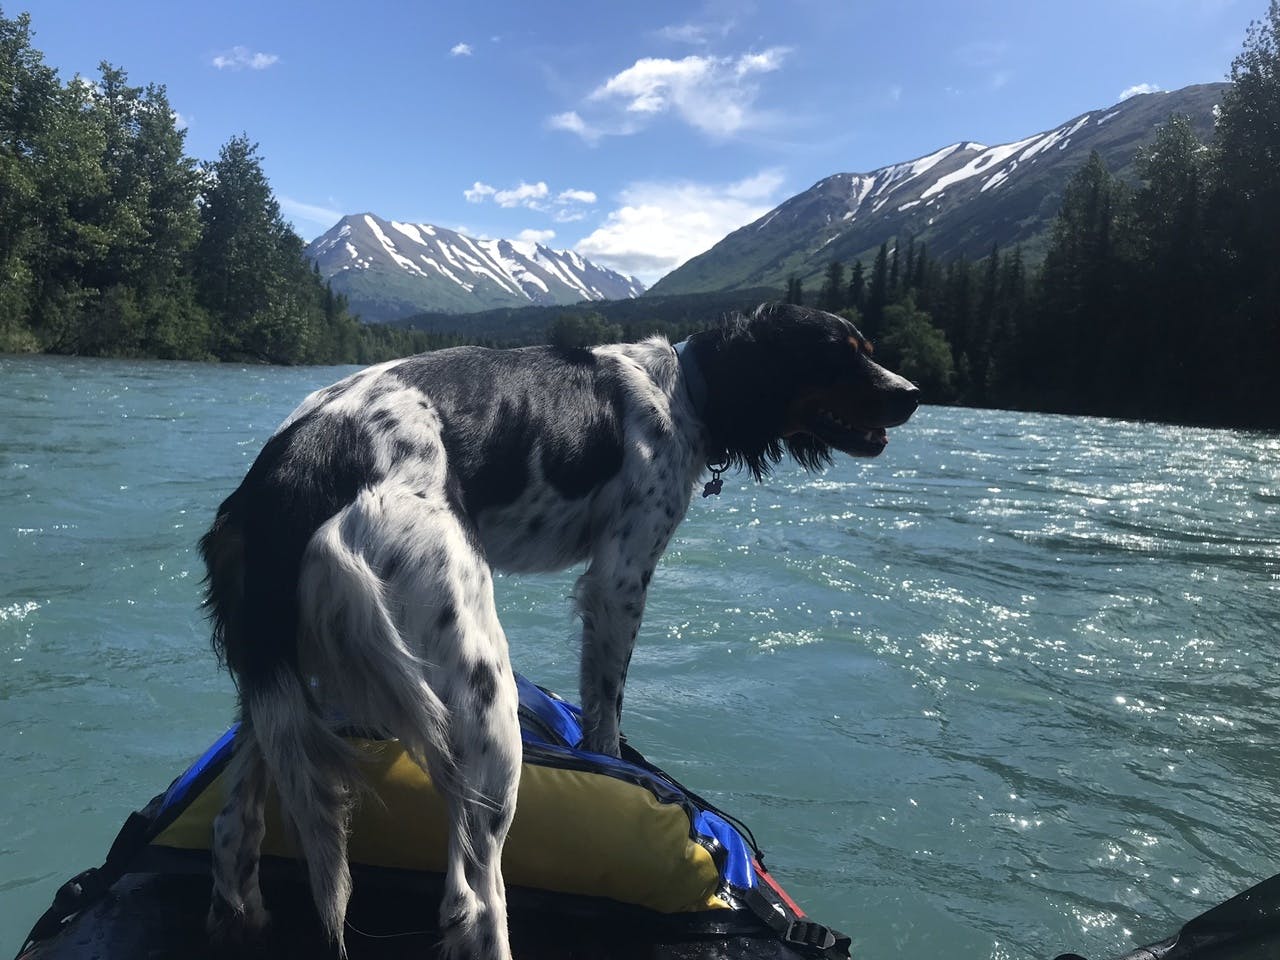 James Lyons: &#x201C;Subsistence Rafting: Floating the Kenai Canyon with a bird dog converted to salmon.&#x201D;